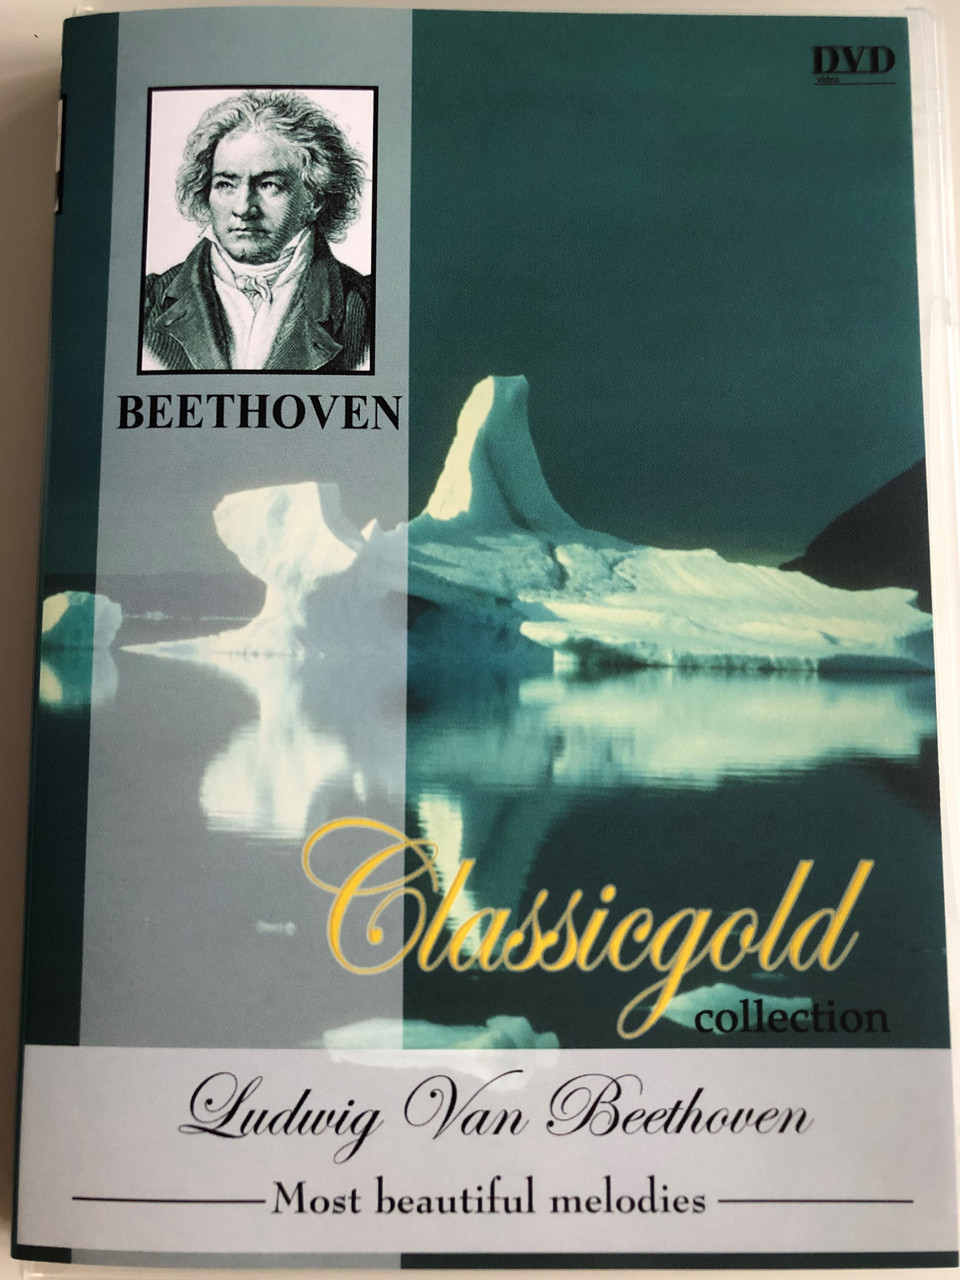 Ludwig Van Beethoven - Most beautiful melodies DVD 2003 / Classicgold  collection / Performed by Wolf van Eyck / Art Media - bibleinmylanguage